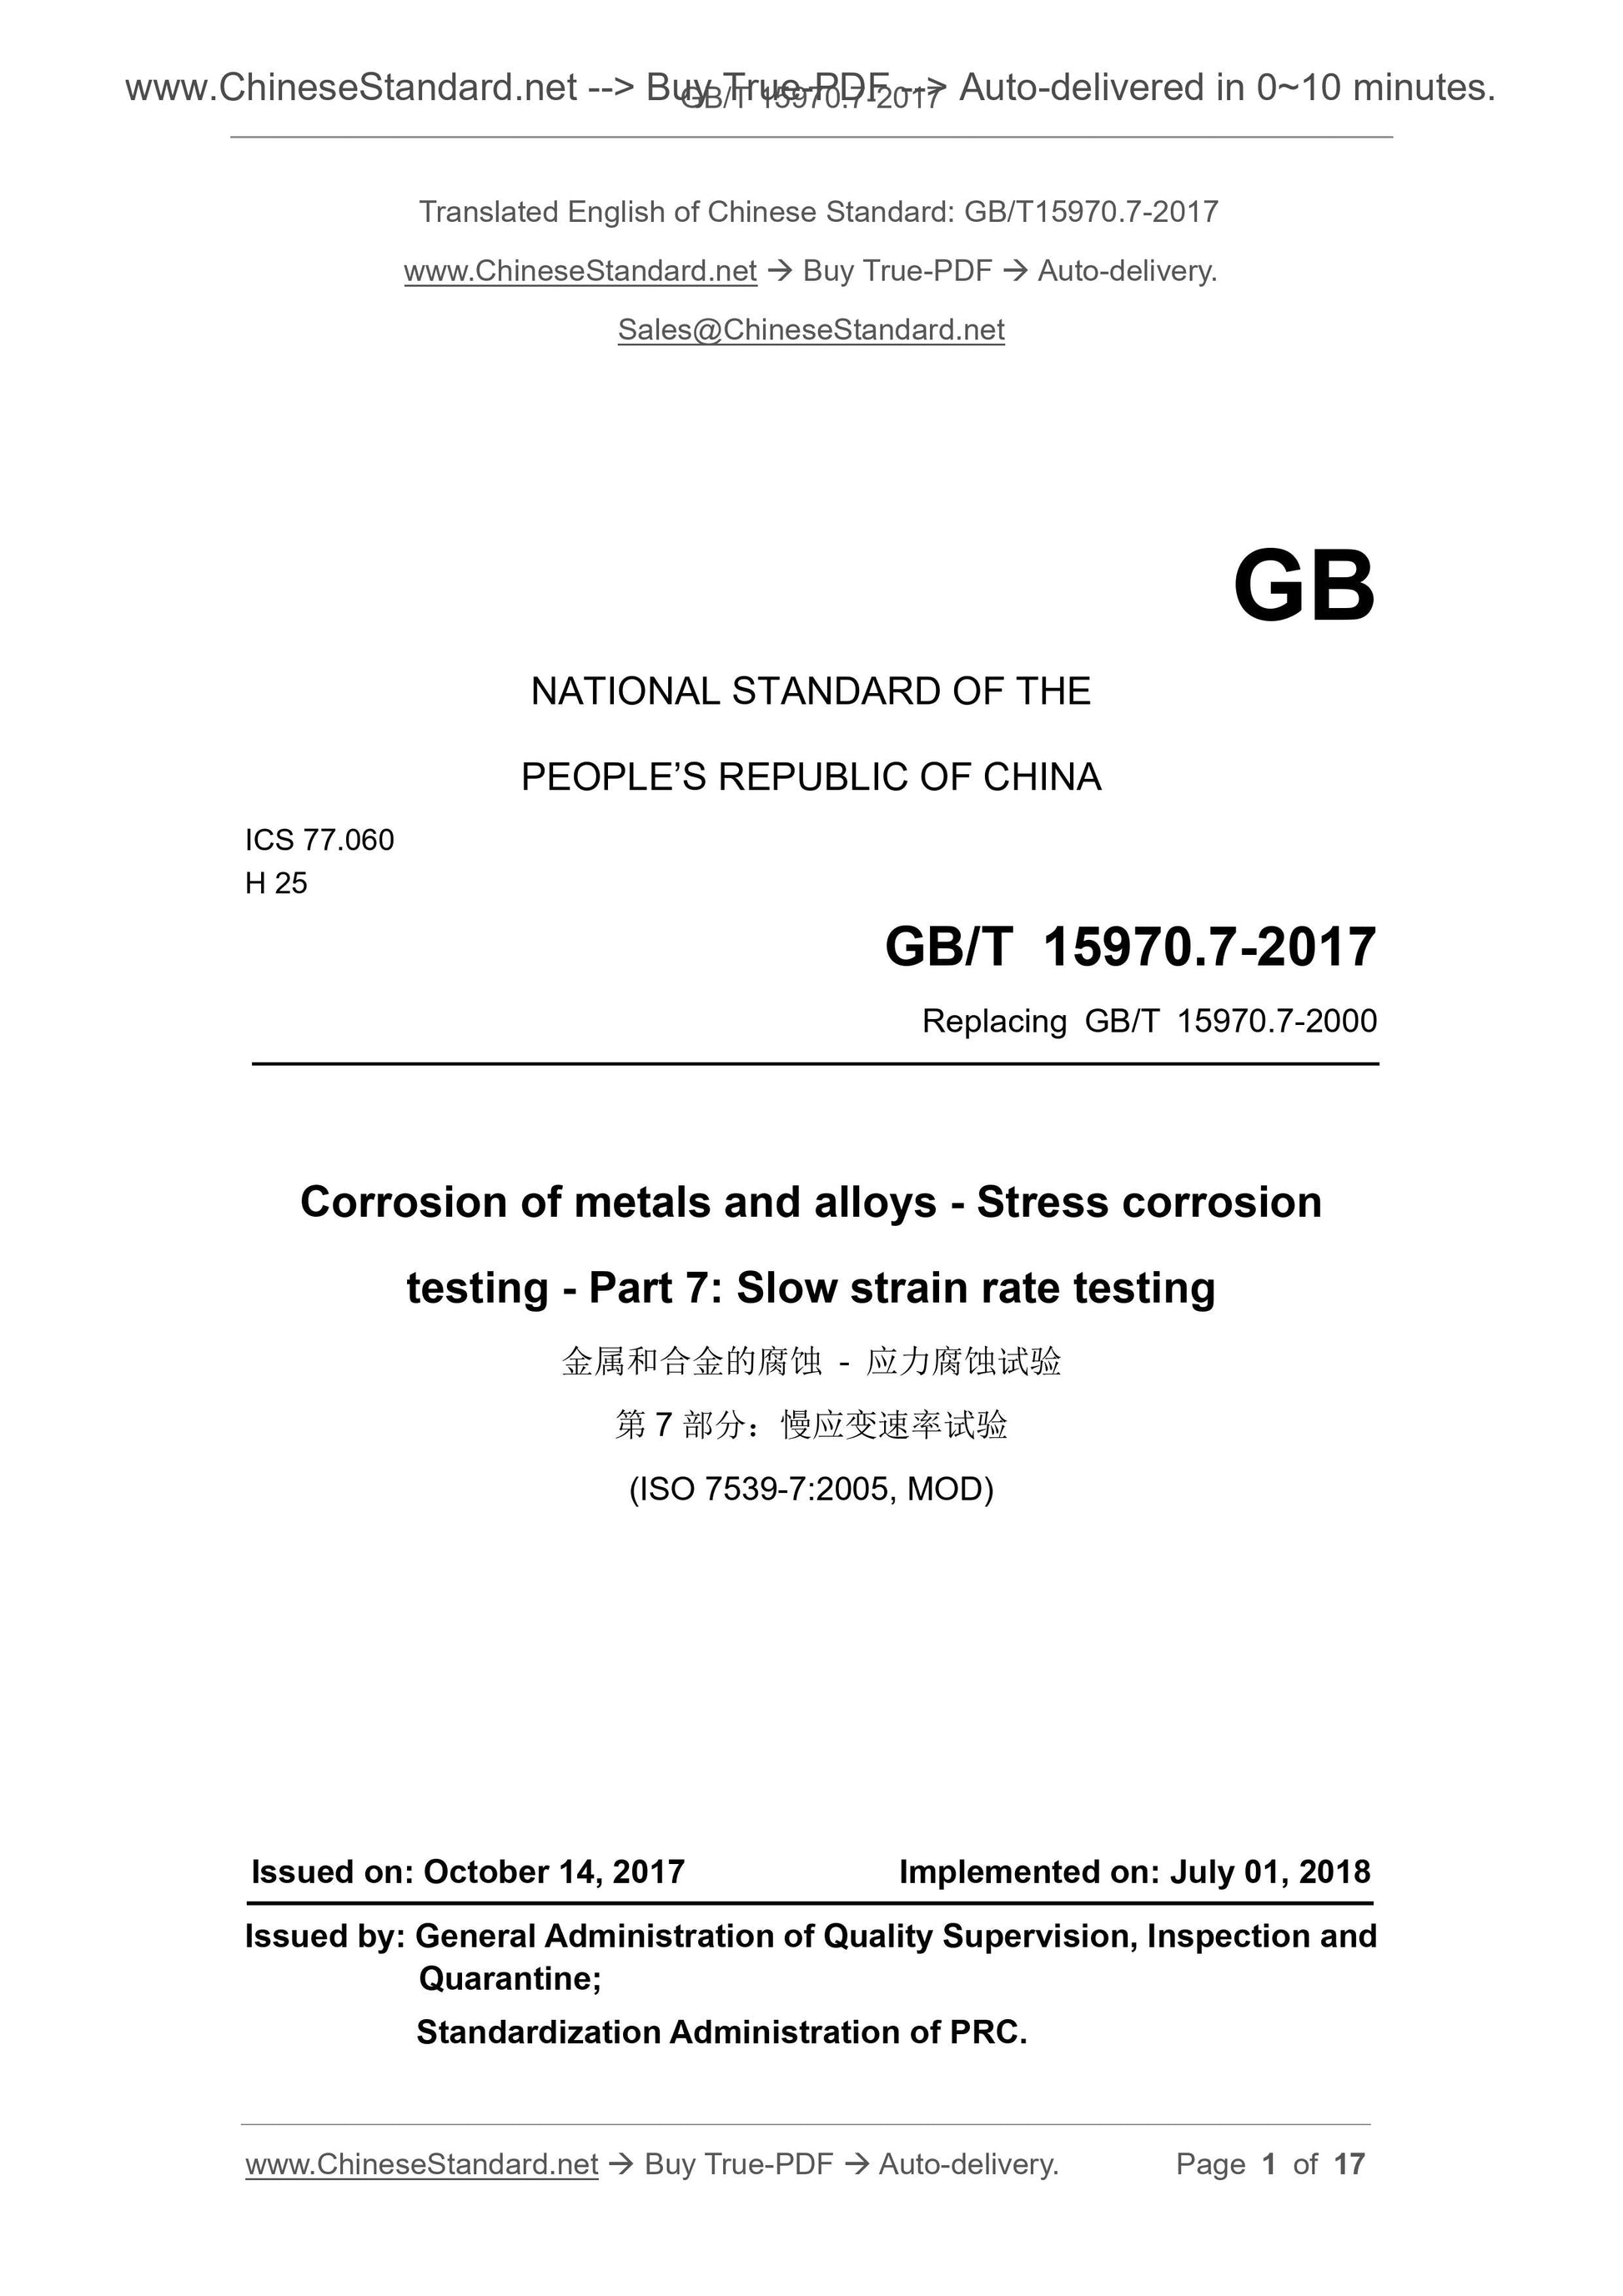 GB/T 15970.7-2017 Page 1